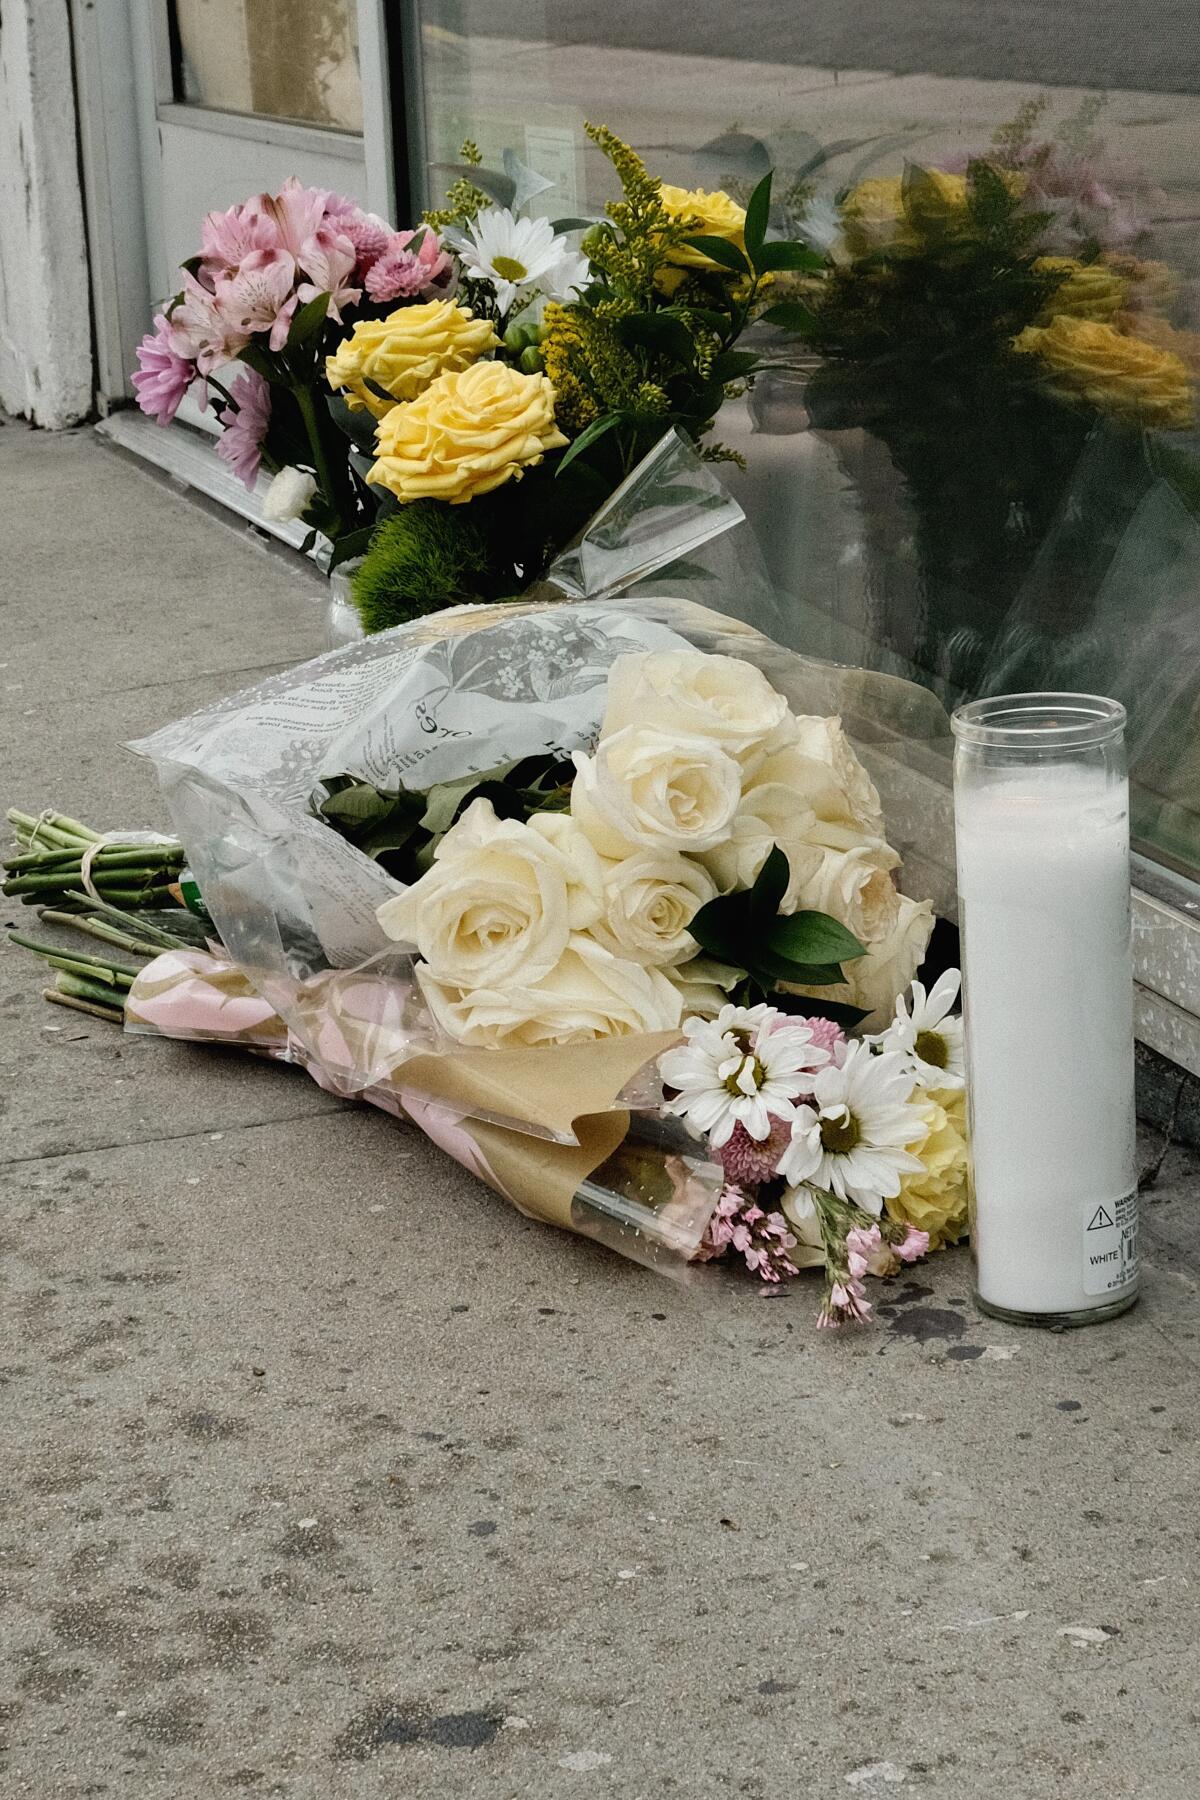 A vertical closeup of a small memorial of flowers and white 